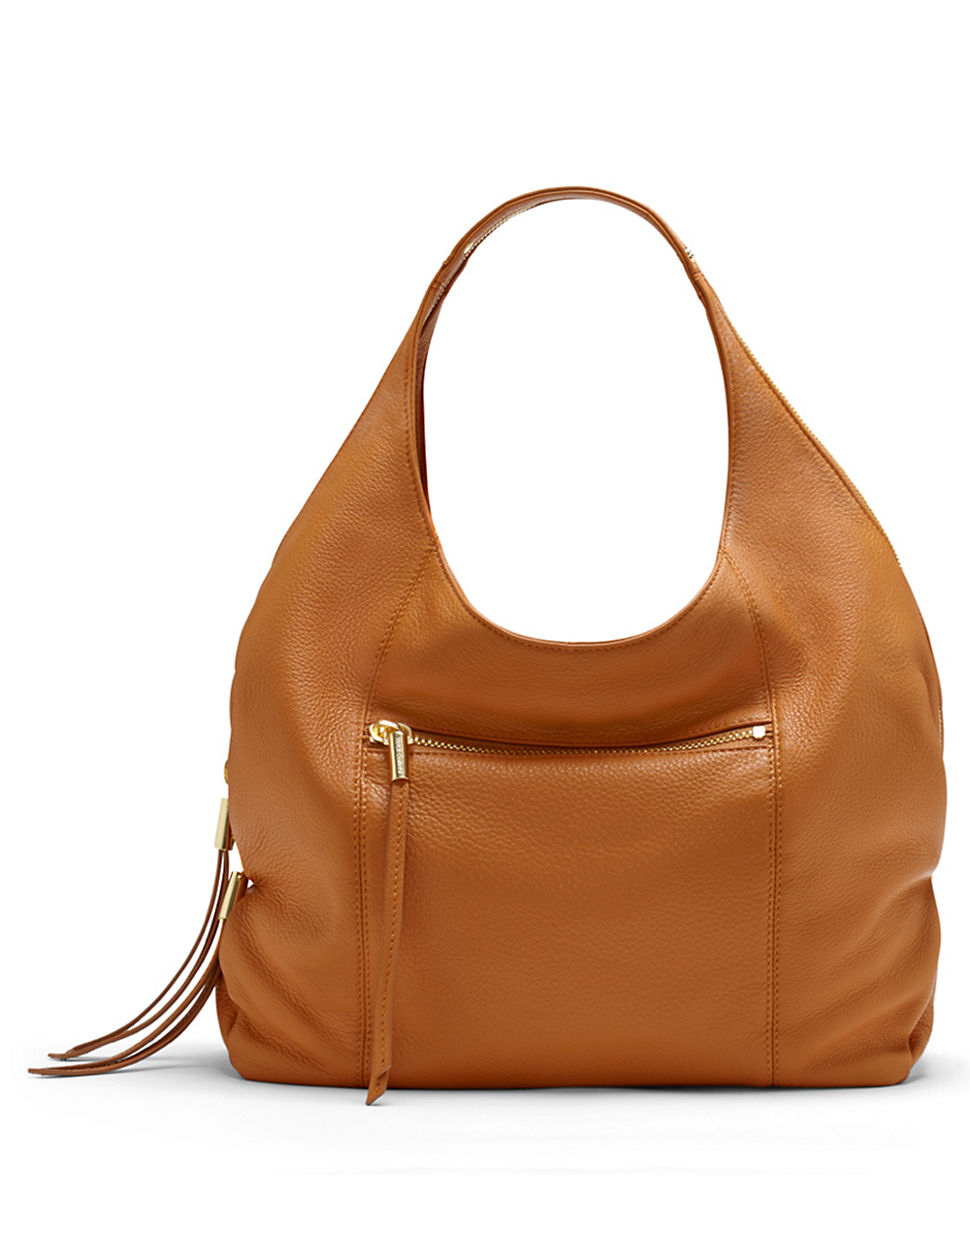 Lyst - Vince Camuto Zoe Leather Hobo Bag in Brown